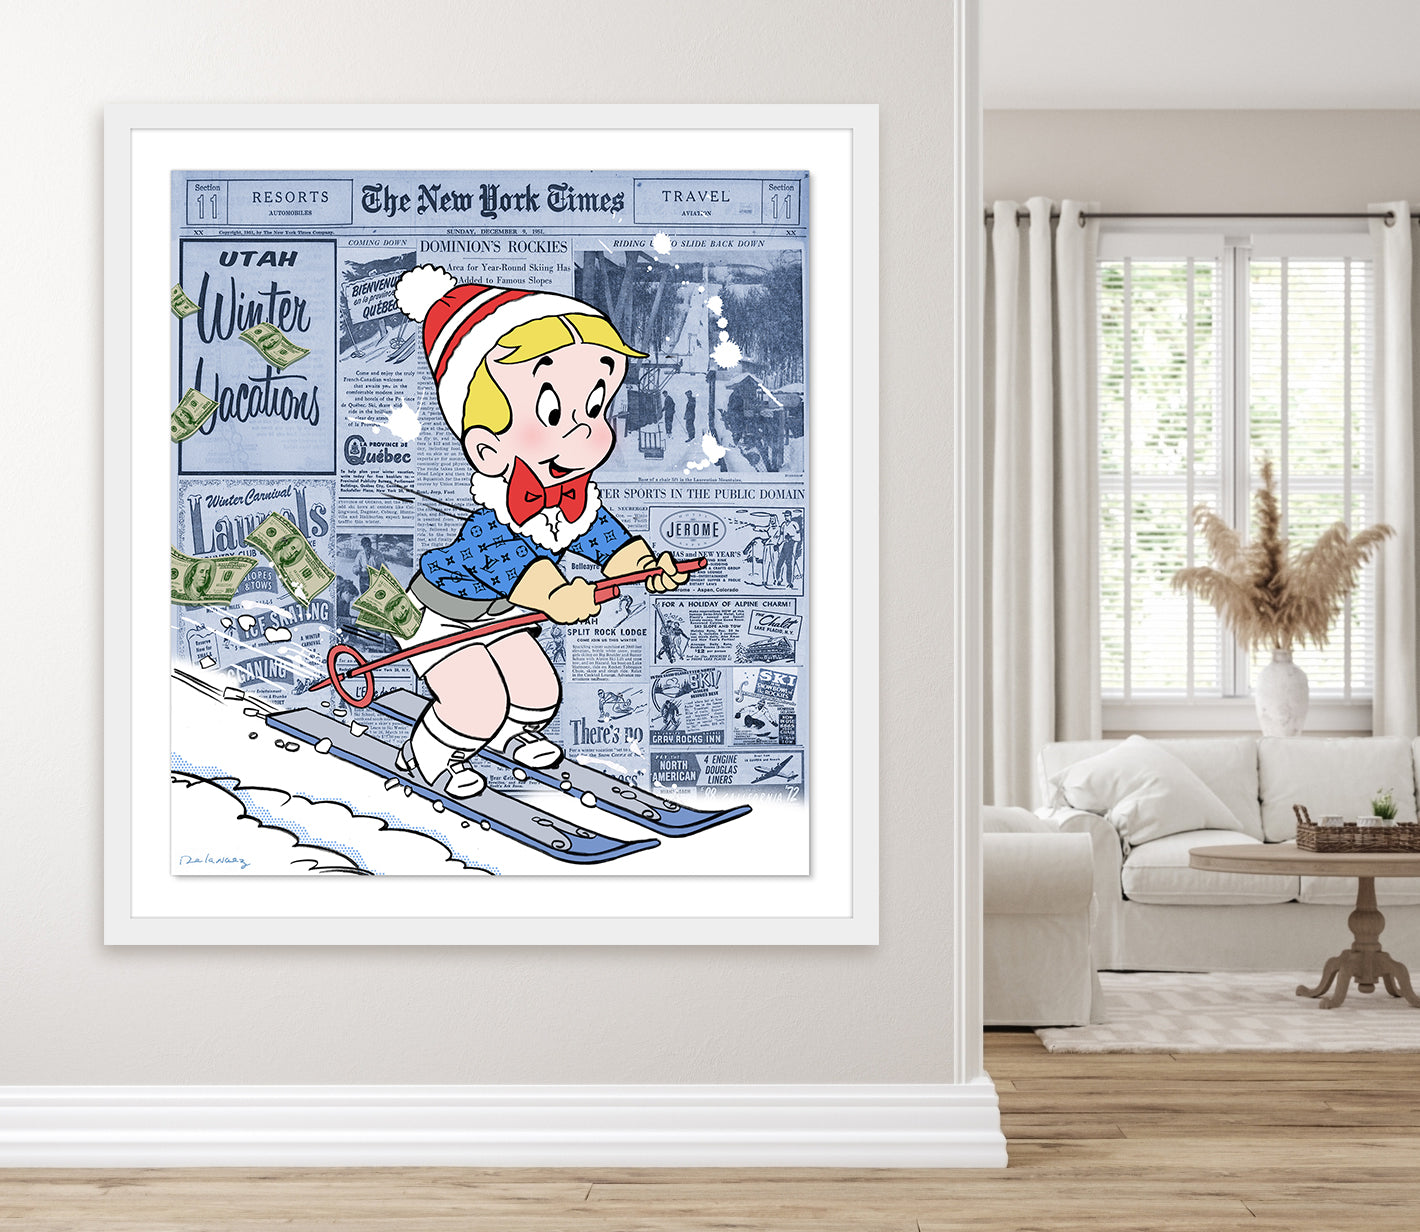 Hit the Slopes: Richie Rich Mixed Media Sketch - FRAMED, Signed